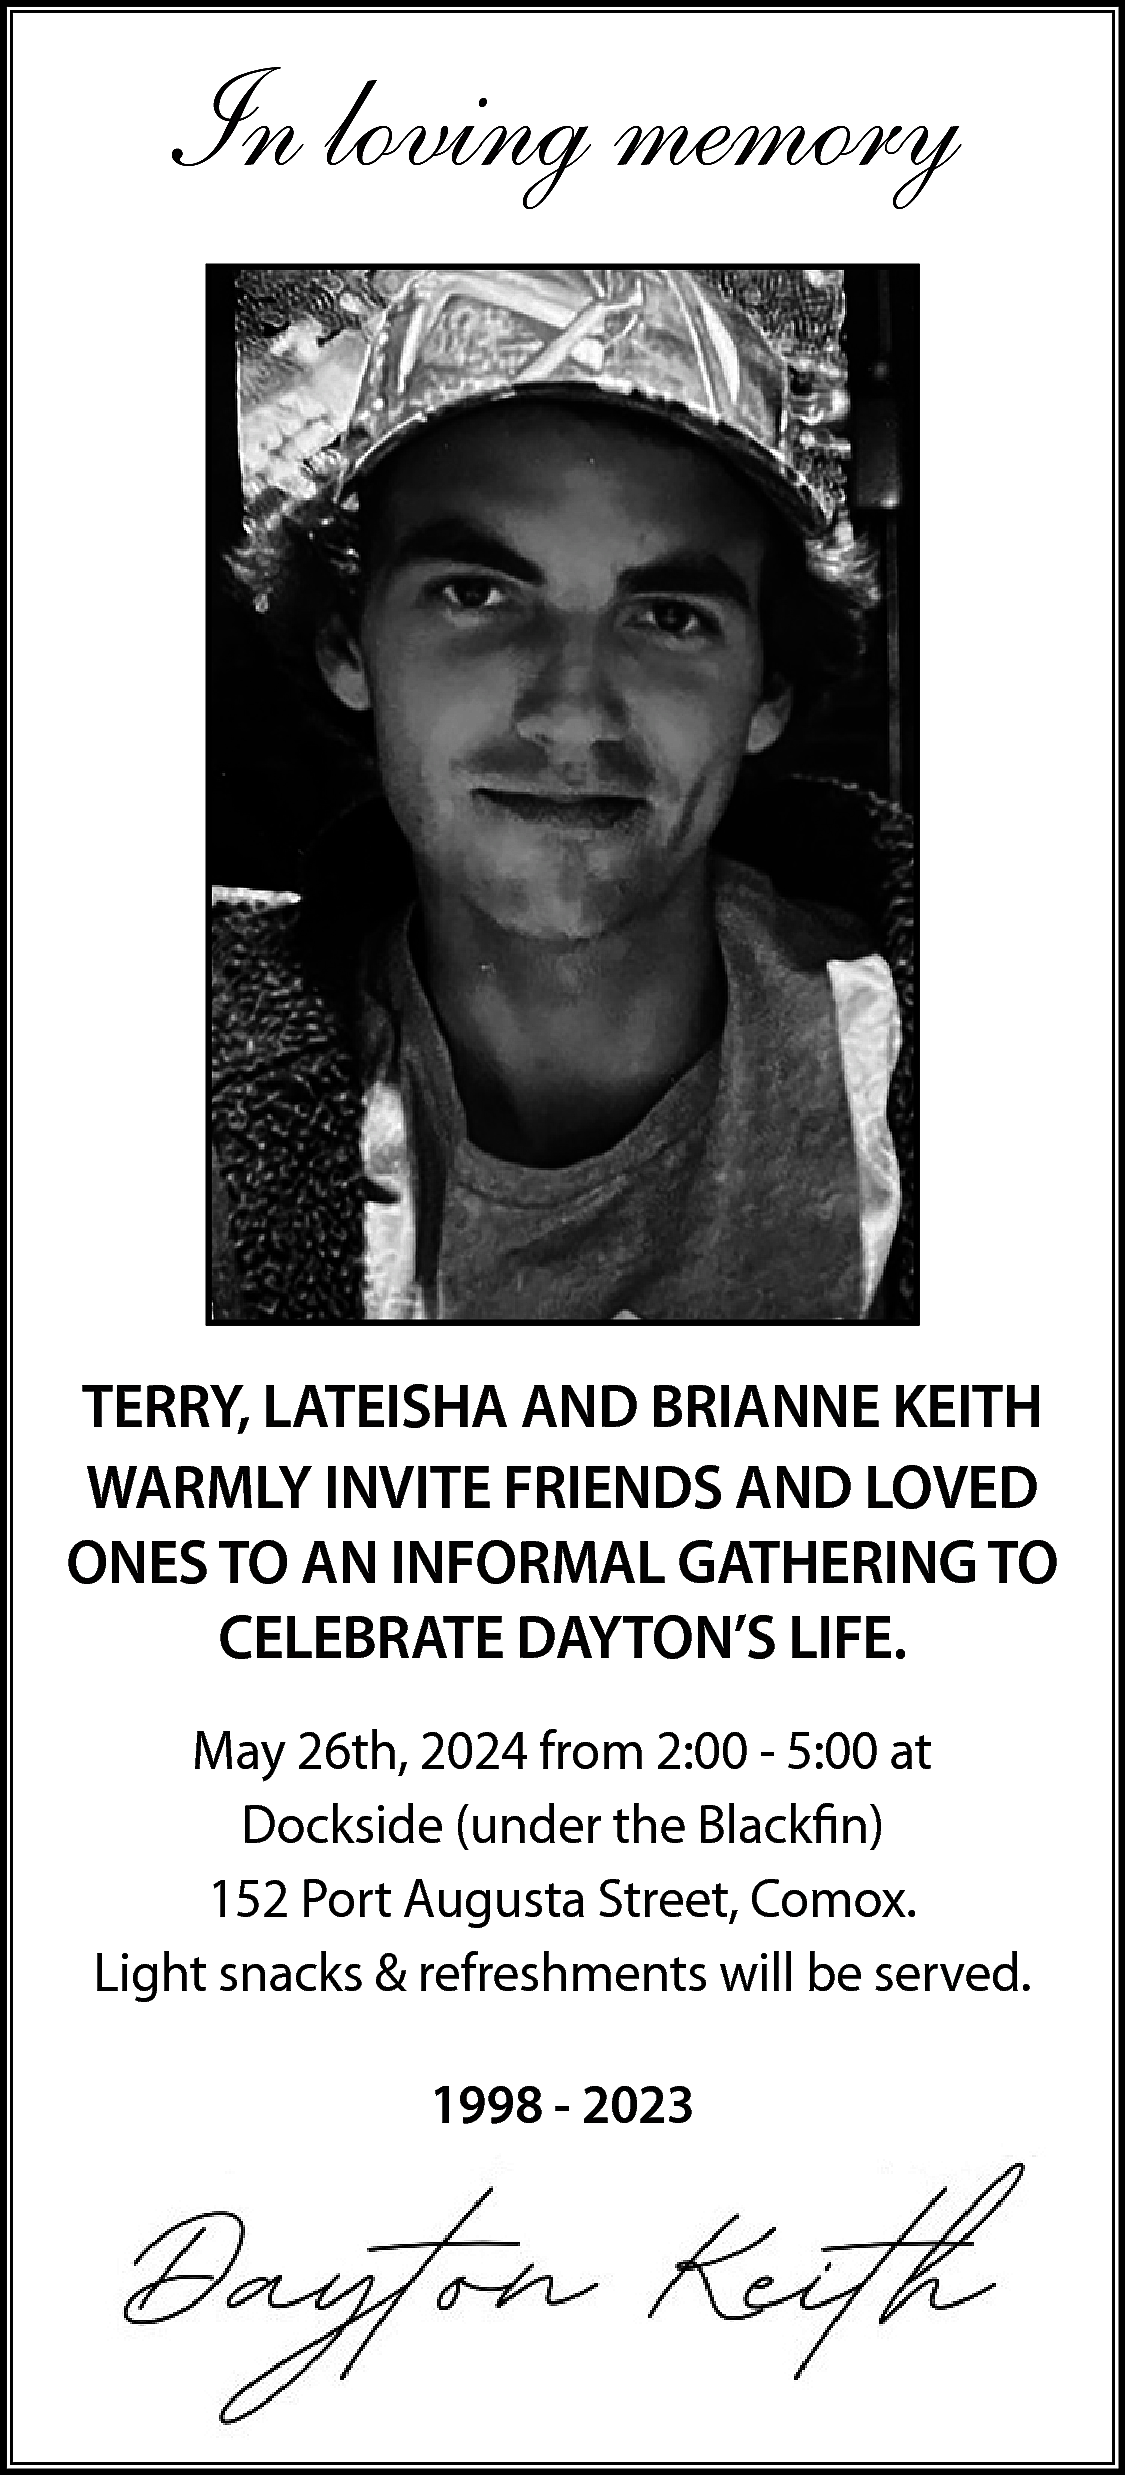 In loving memory <br> <br>TERRY,  In loving memory    TERRY, LATEISHA AND BRIANNE KEITH  WARMLY INVITE FRIENDS AND LOVED  ONES TO AN INFORMAL GATHERING TO  CELEBRATE DAYTON’S LIFE.  May 26th, 2024 from 2:00 - 5:00 at  Dockside (under the Blackfin)  152 Port Augusta Street, Comox.  Light snacks & refreshments will be served.  1998 - 2023    